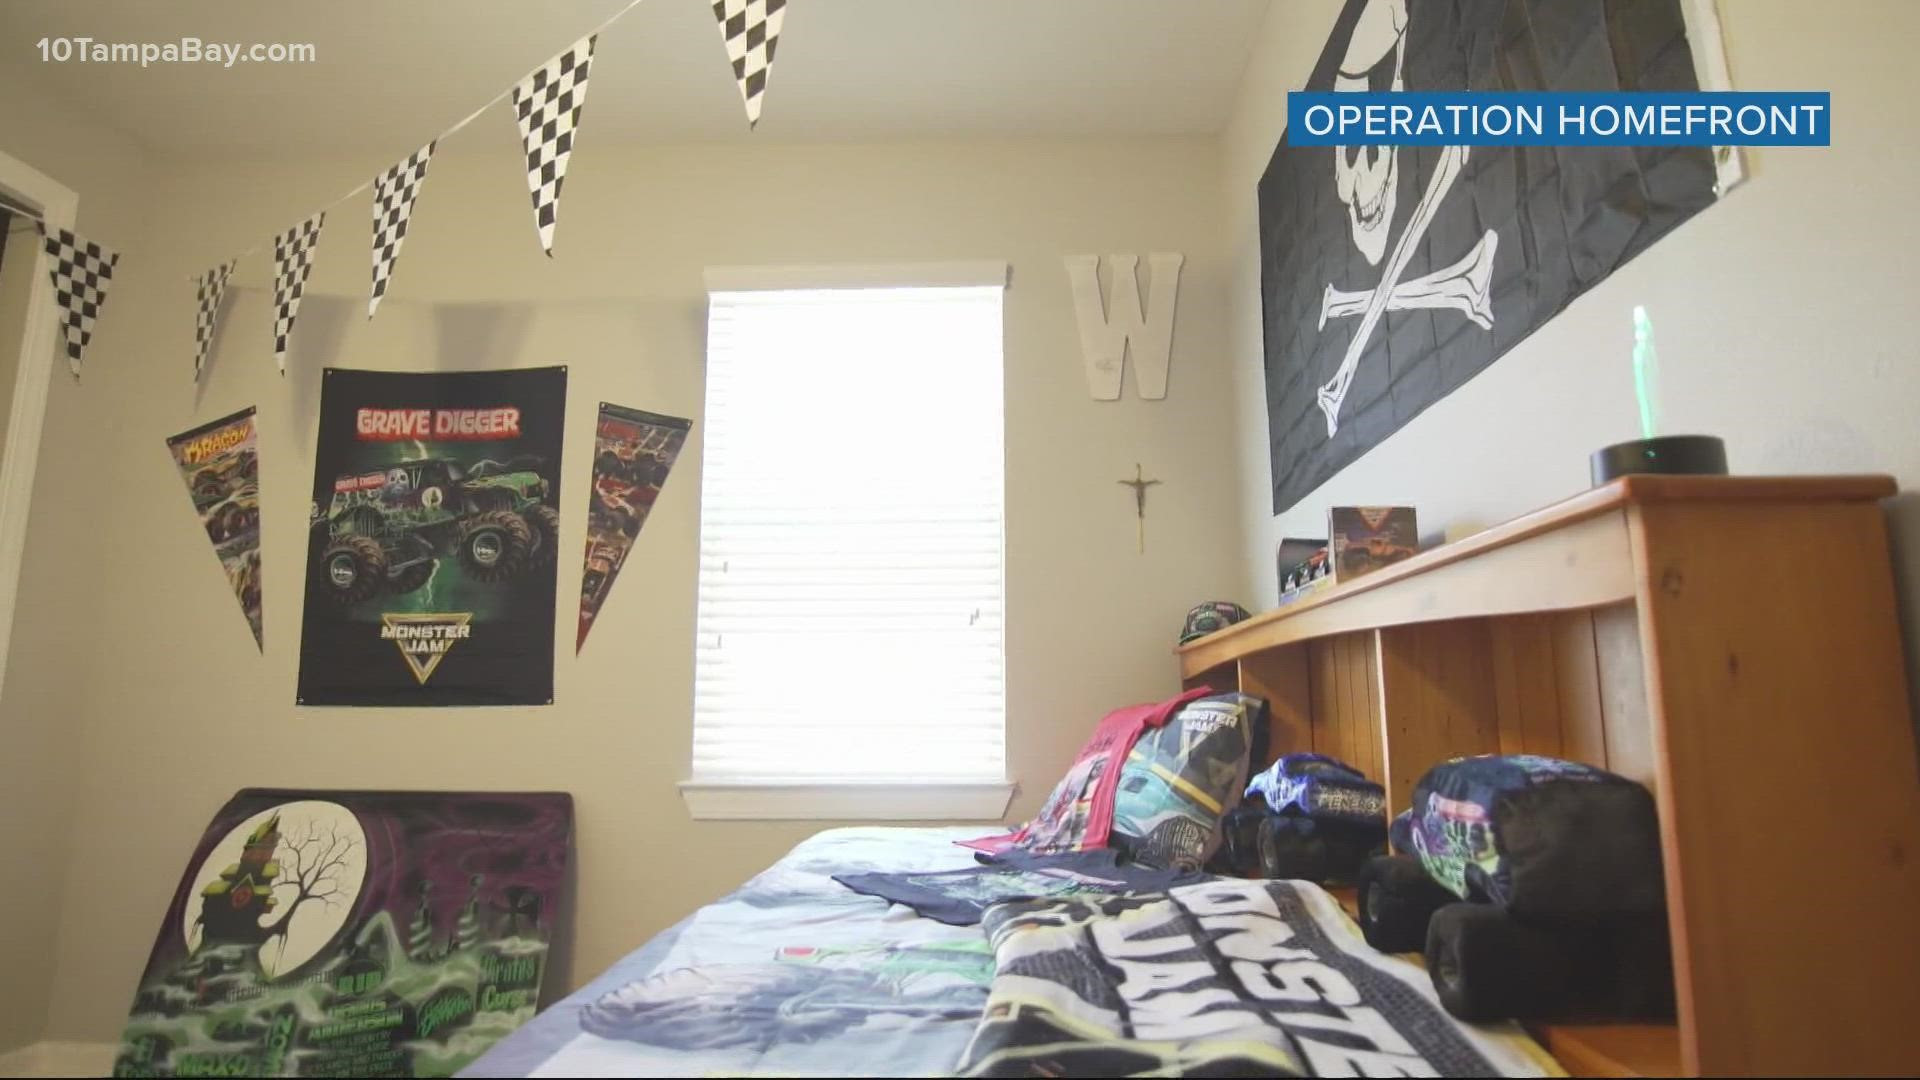 The kids now have a decked-out Monster Jam-themed room with new bedding, toys and decorations.